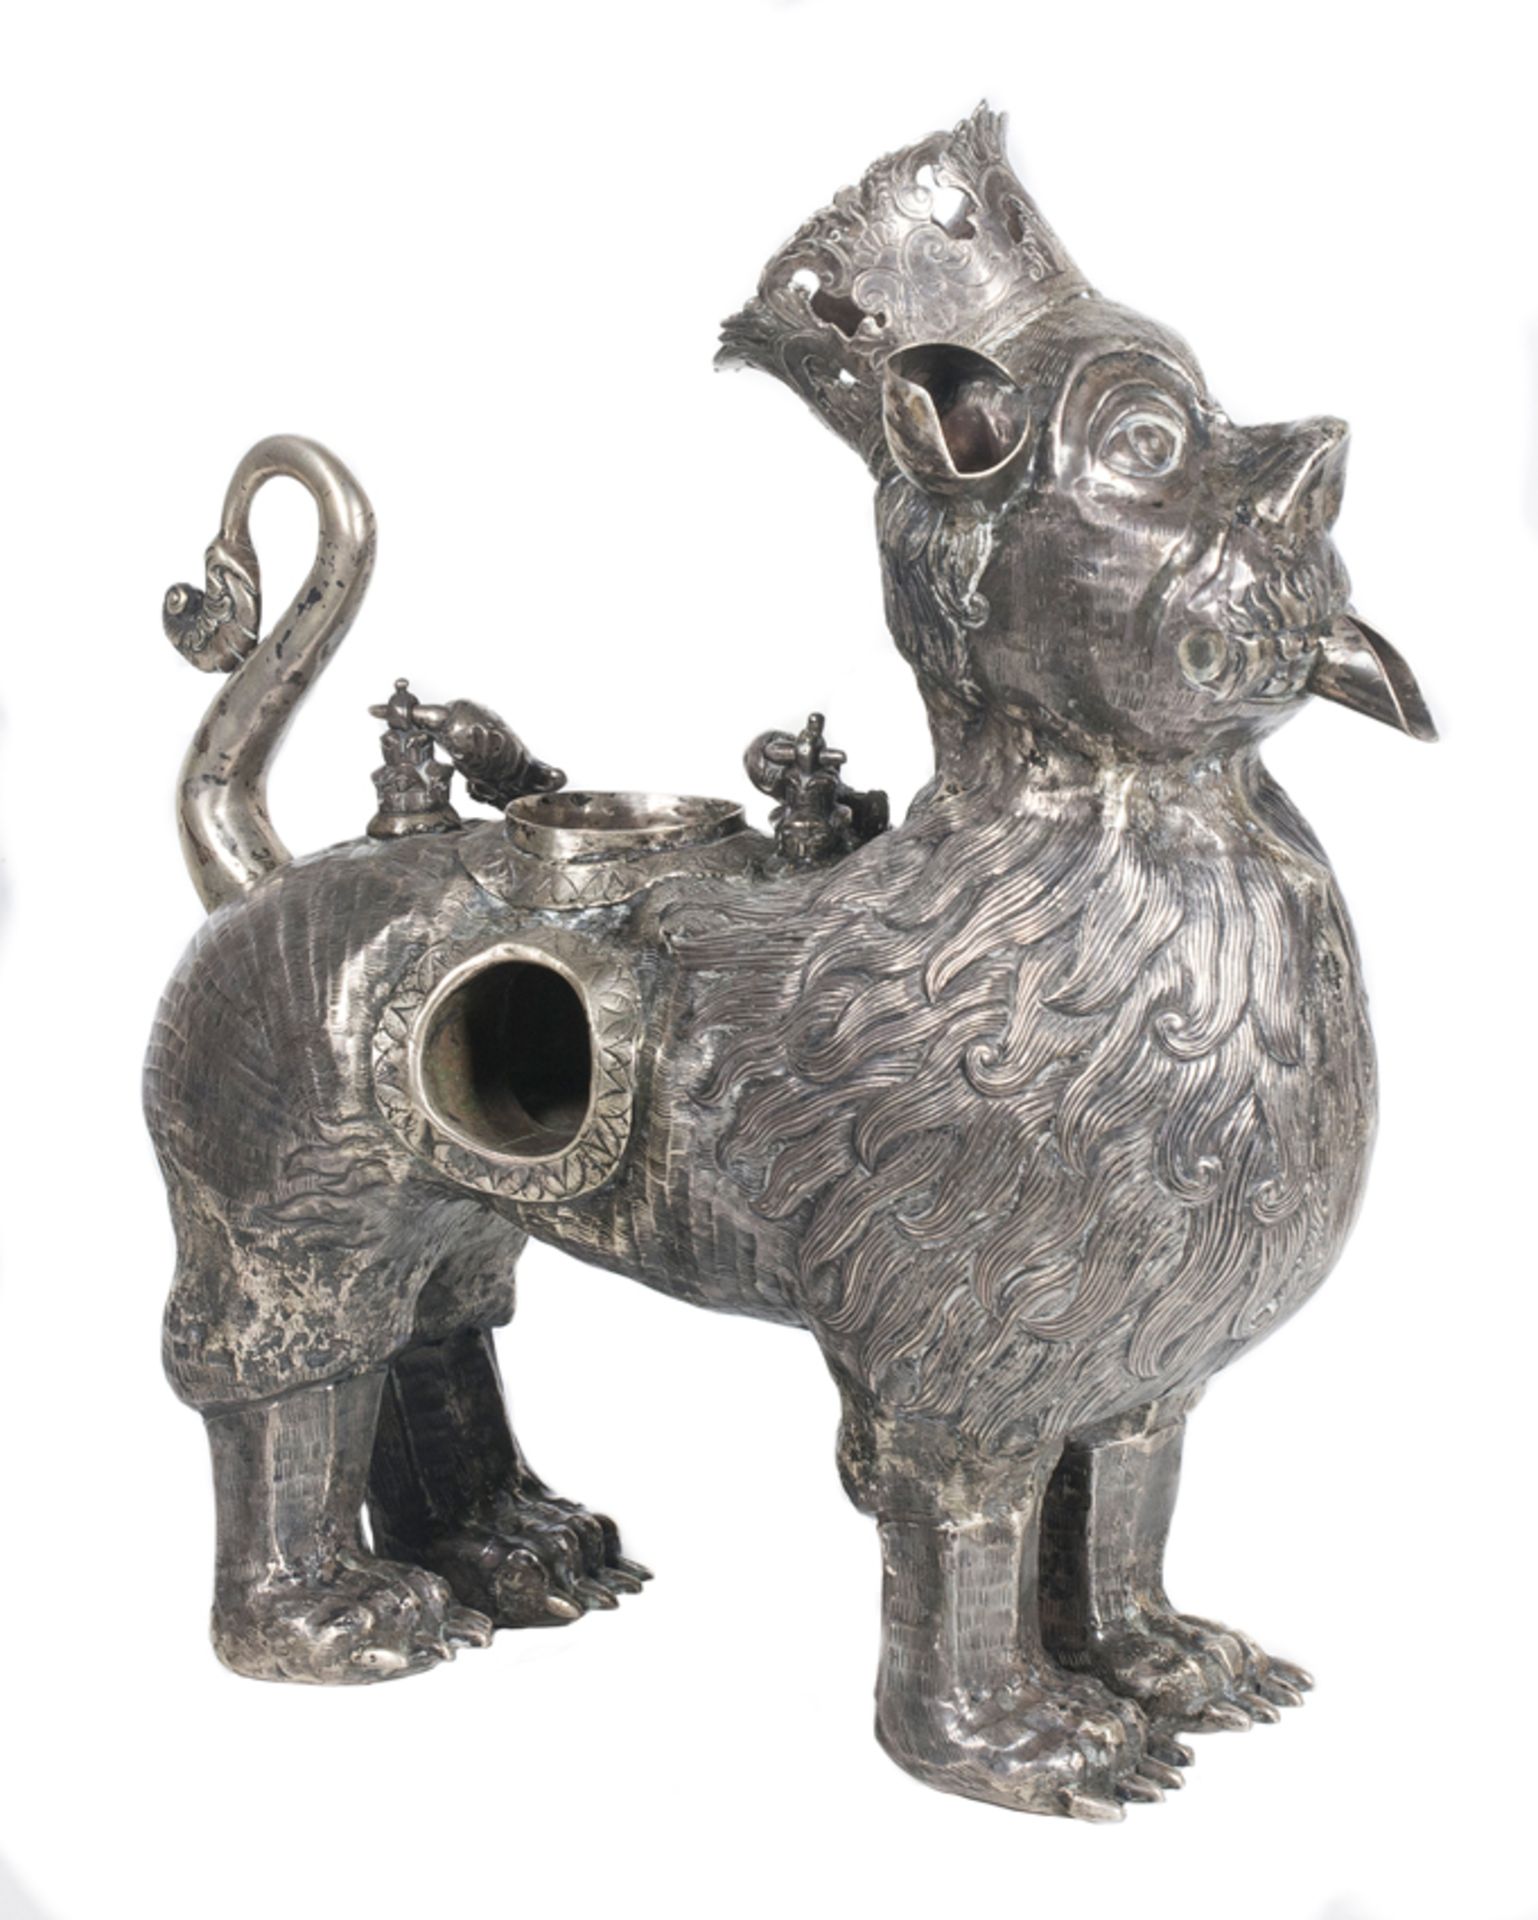 Mate kettle. Hammered silver figure, cast, embossed and chased. Peru. Viceroyalty. Colonial. Late 18